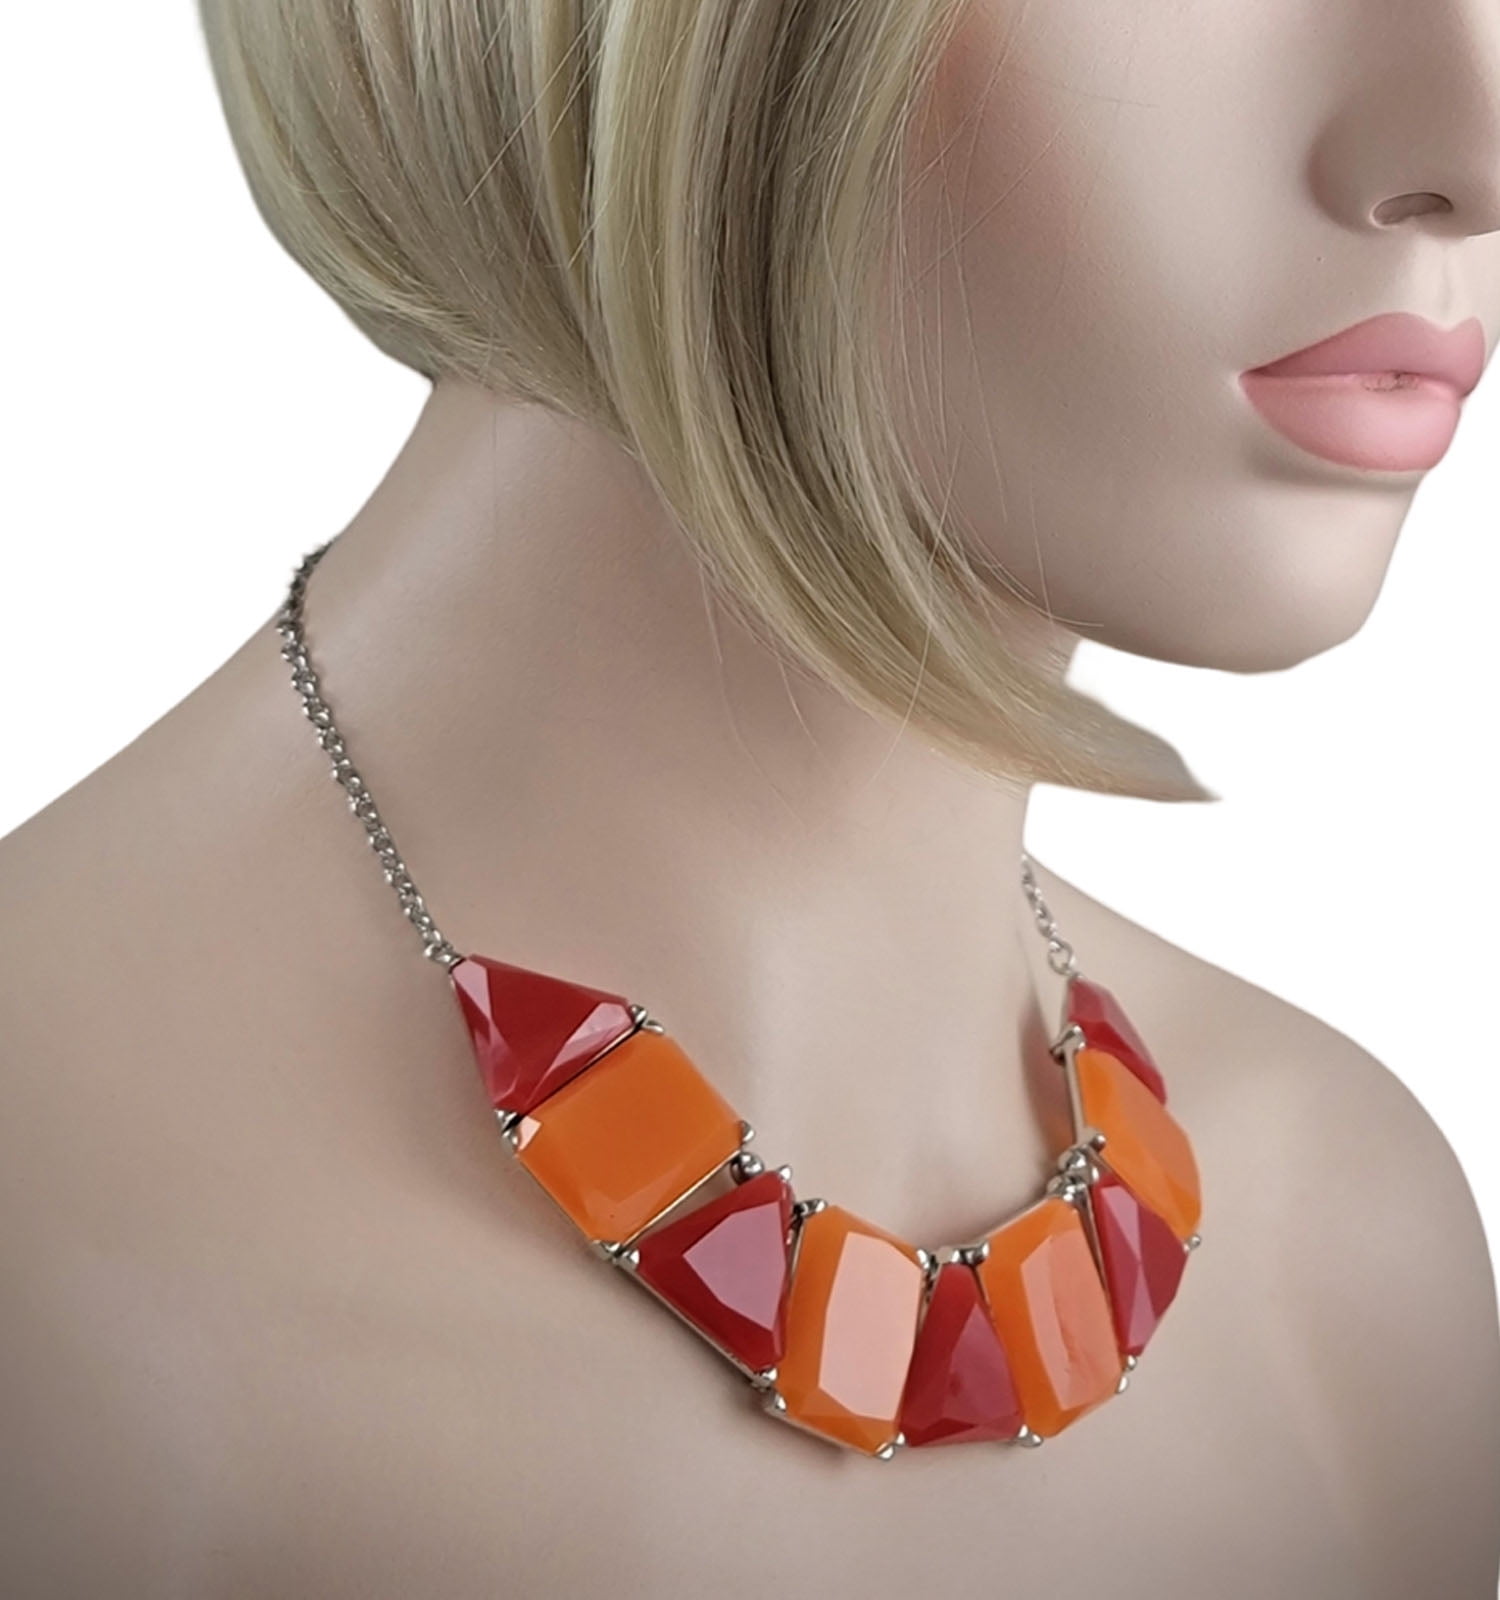 Majestic Statement Necklace (Salmon Orange) | Ideal Gift For Women |  Statement Jewelry